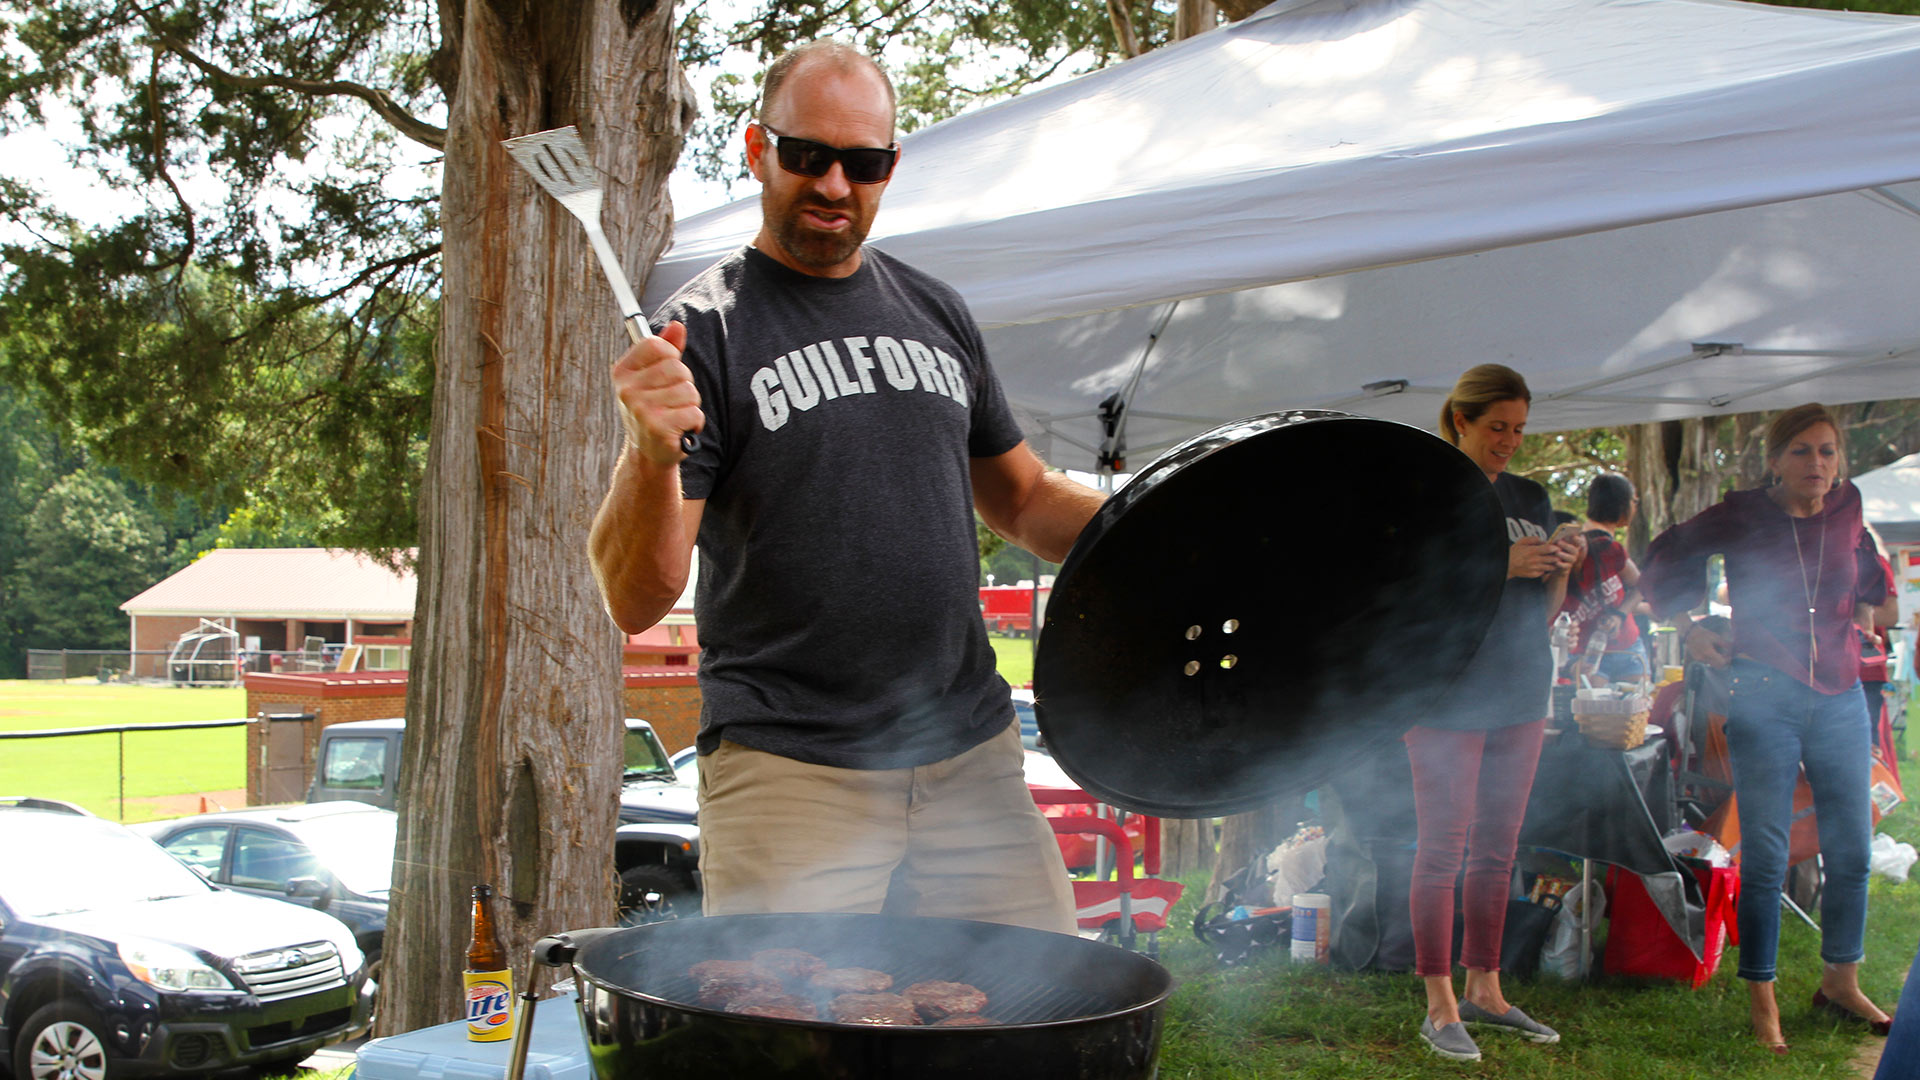 A Guilfordian cooks delicious food on the grill during tailgating at Homecoming.